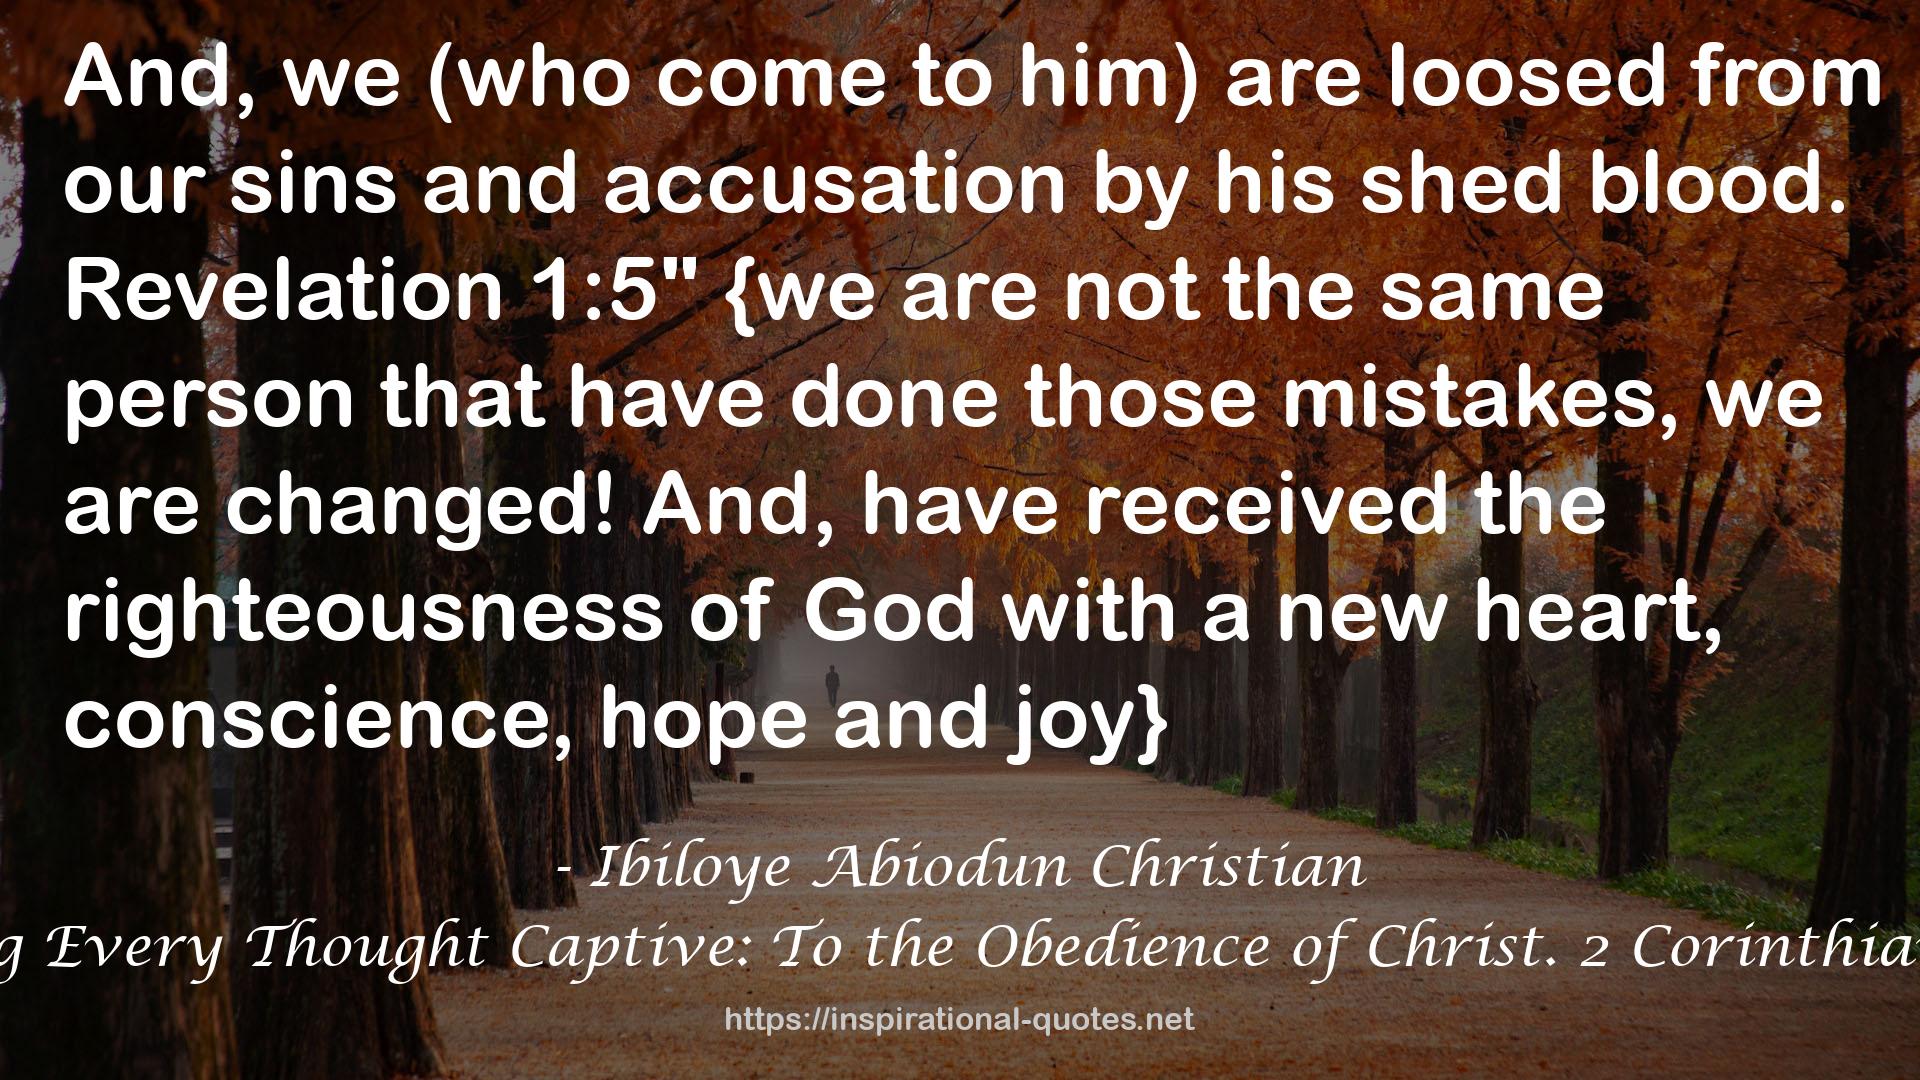 Taking Every Thought Captive: To the Obedience of Christ. 2 Corinthians 10:5 QUOTES